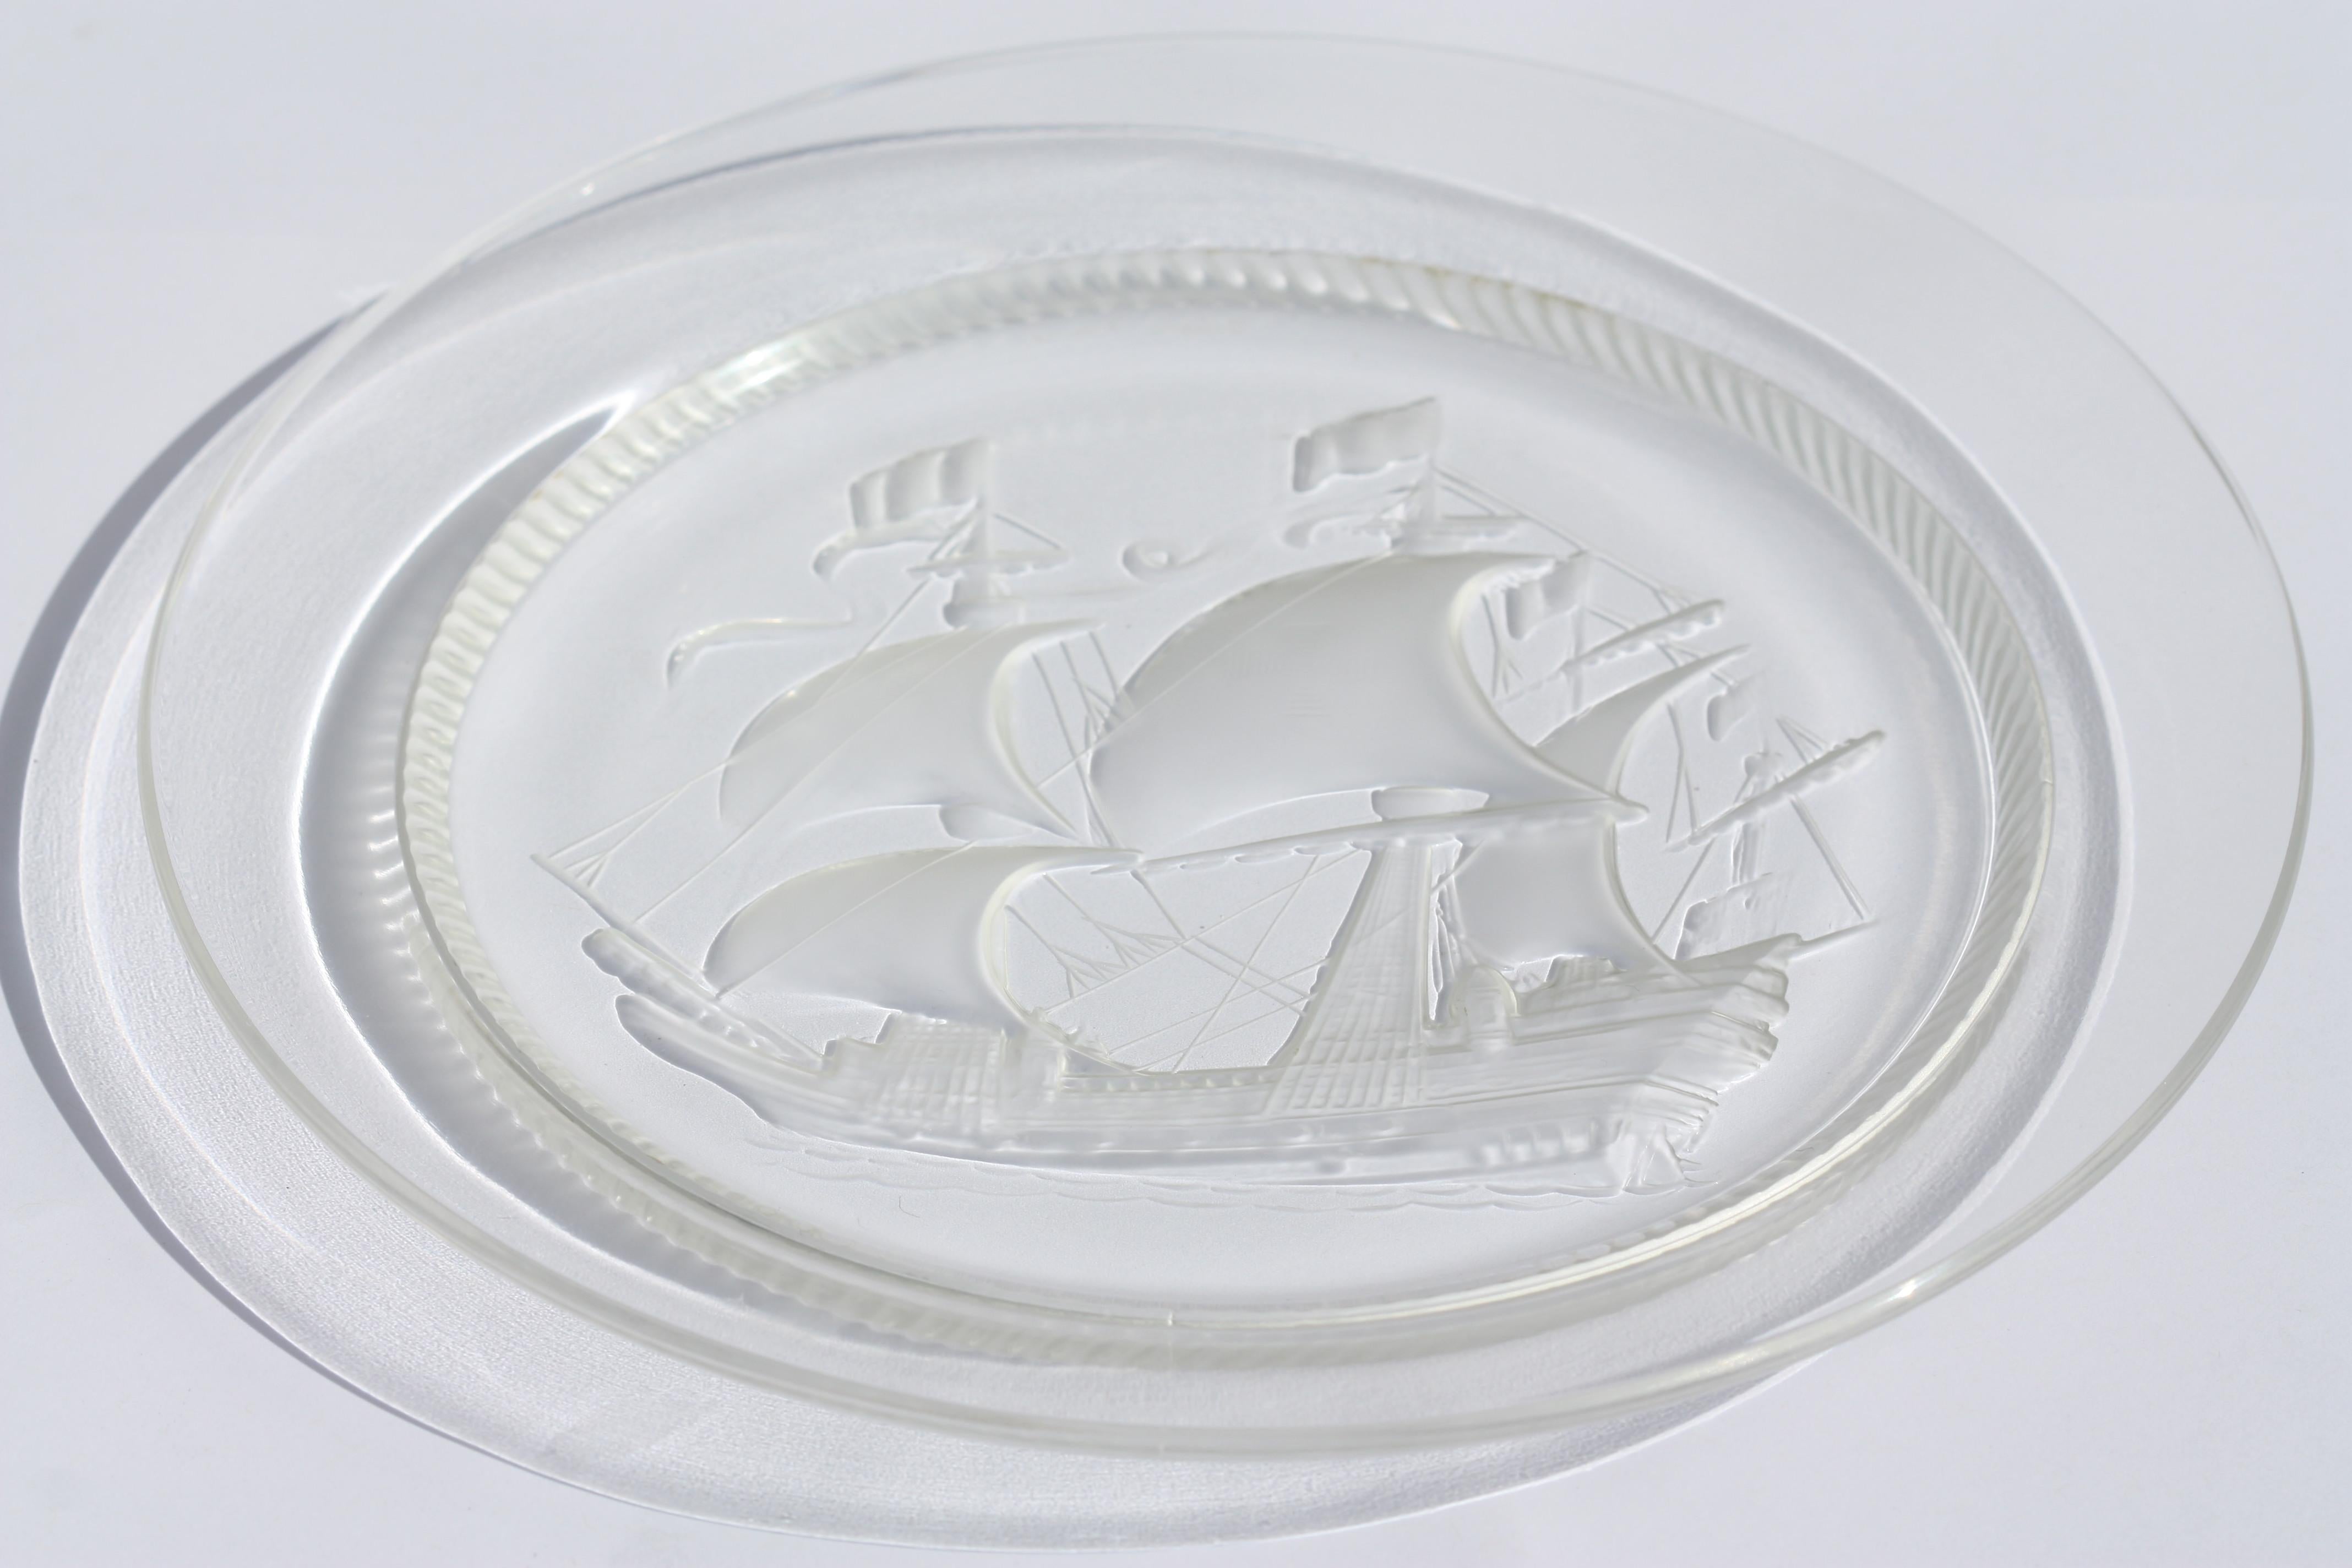 
A Lalique Crystal 'Ship' glass plate, Modern
with a ship at high seas
signed
Lalique France
8.5 in. (21.59 cm.) diameter
